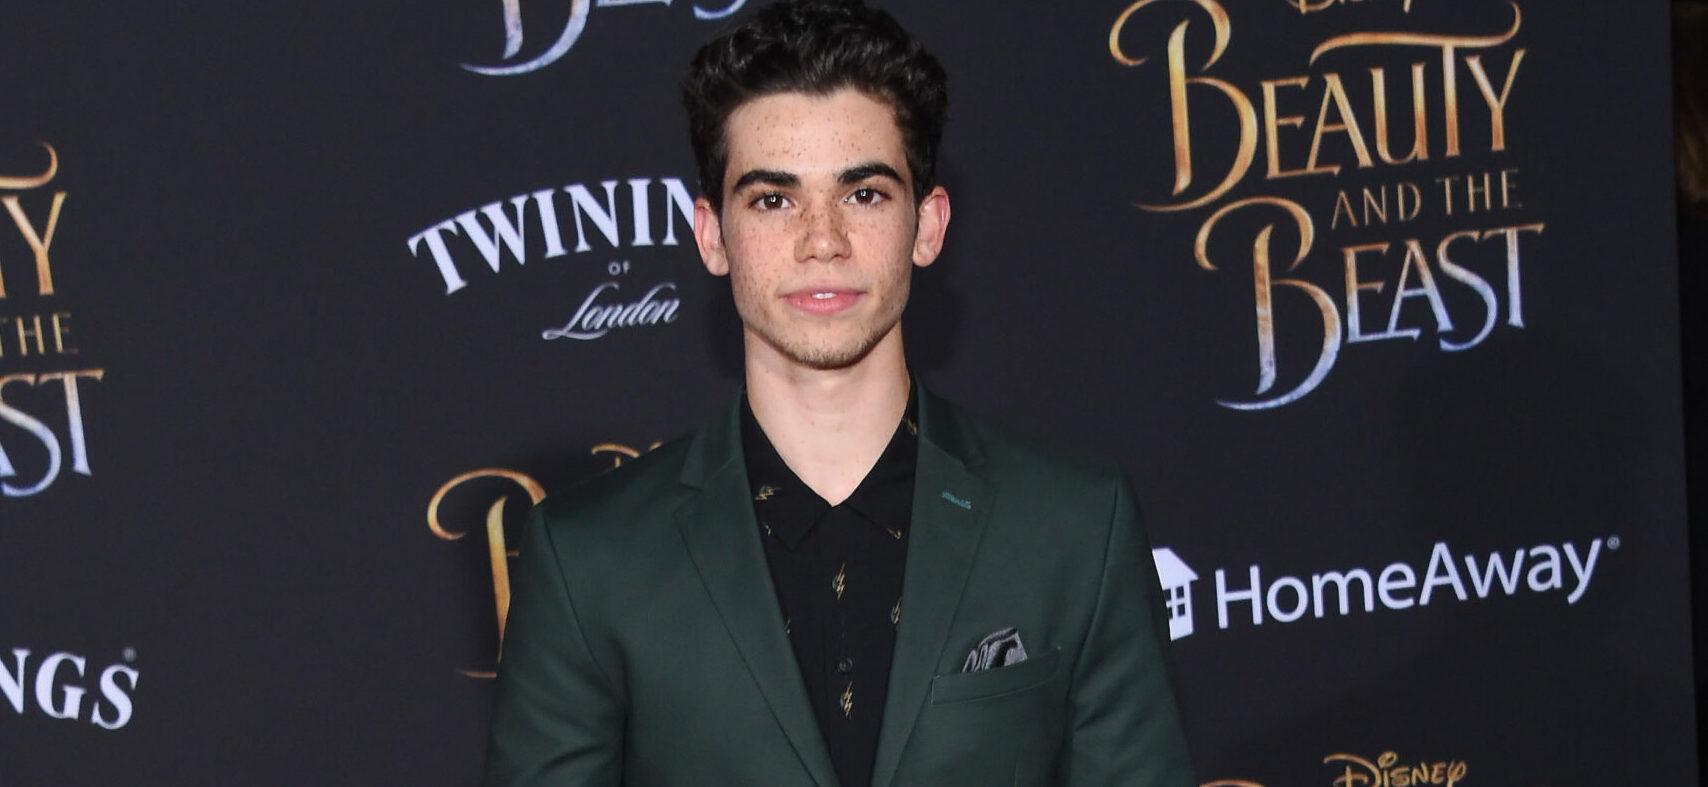 Cameron Boyce Foundation Will Host First-Ever Gala In Honor Of His Posthumous 23rd Birthday